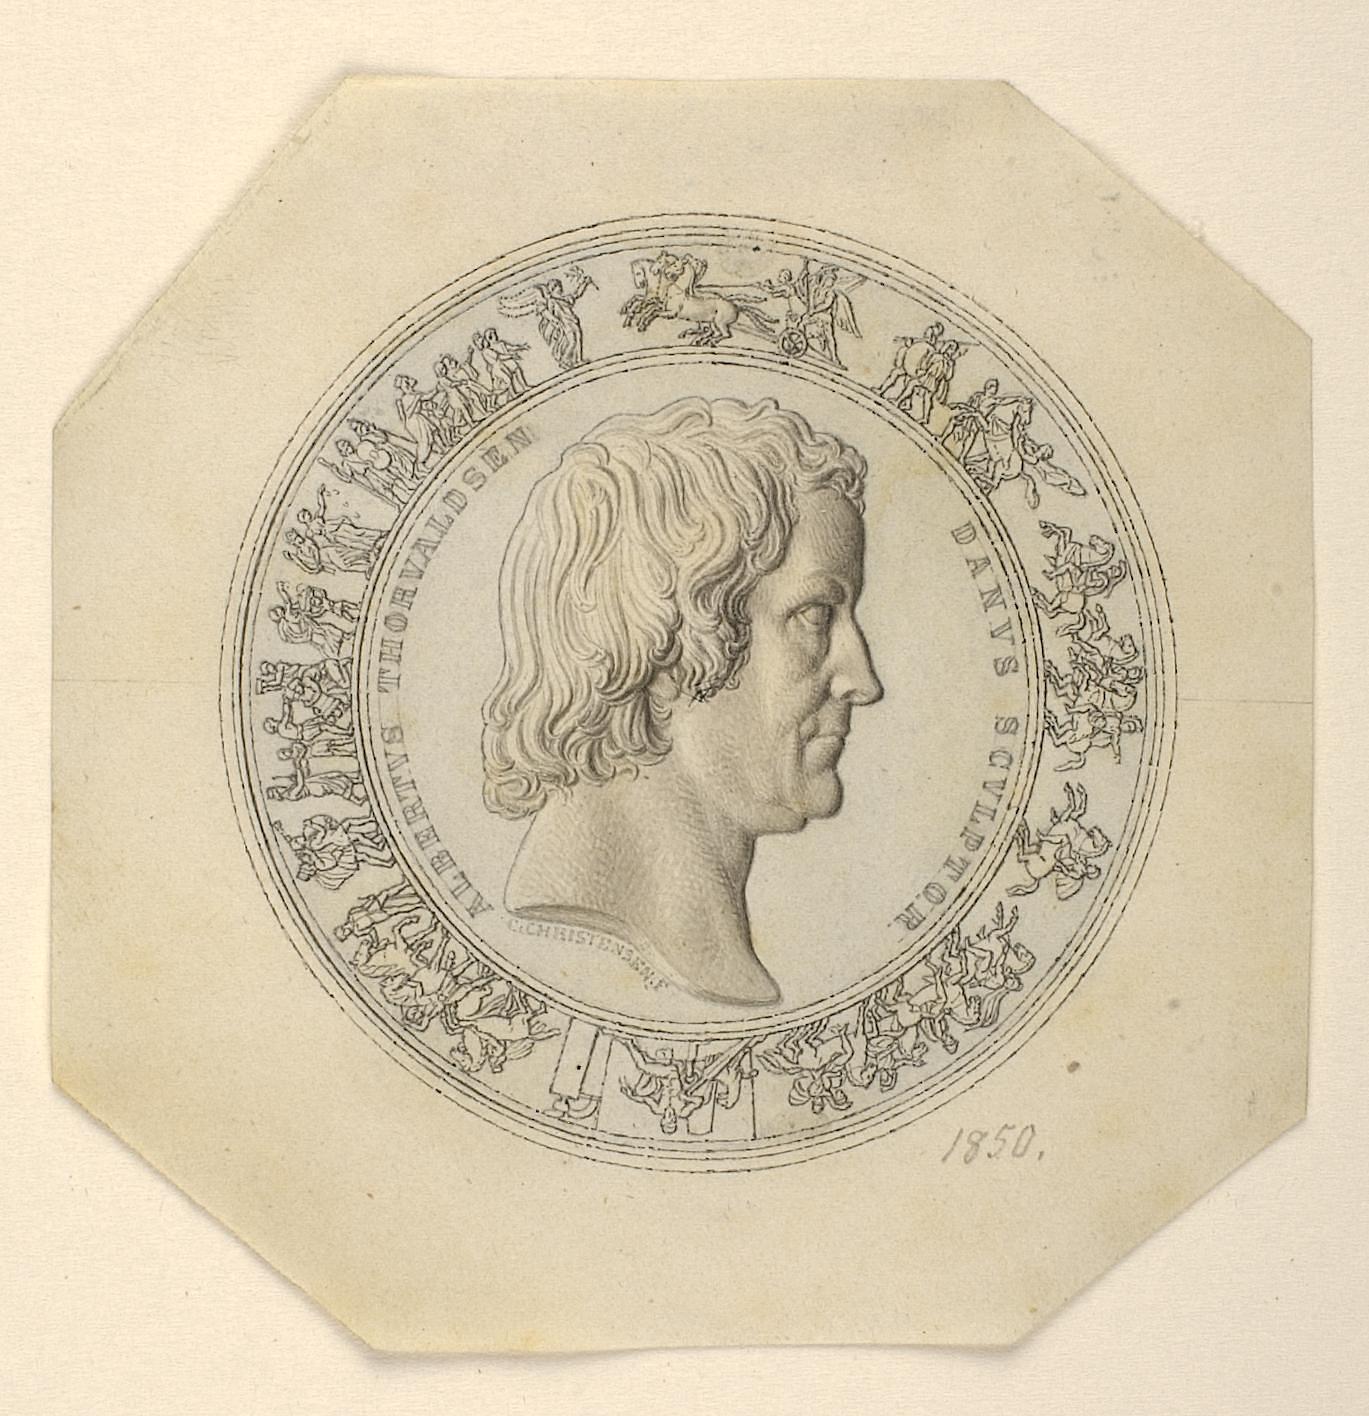 Portrait of Thorvaldsen. Parts of Alexander the Great's Entry into Babylon, D1780